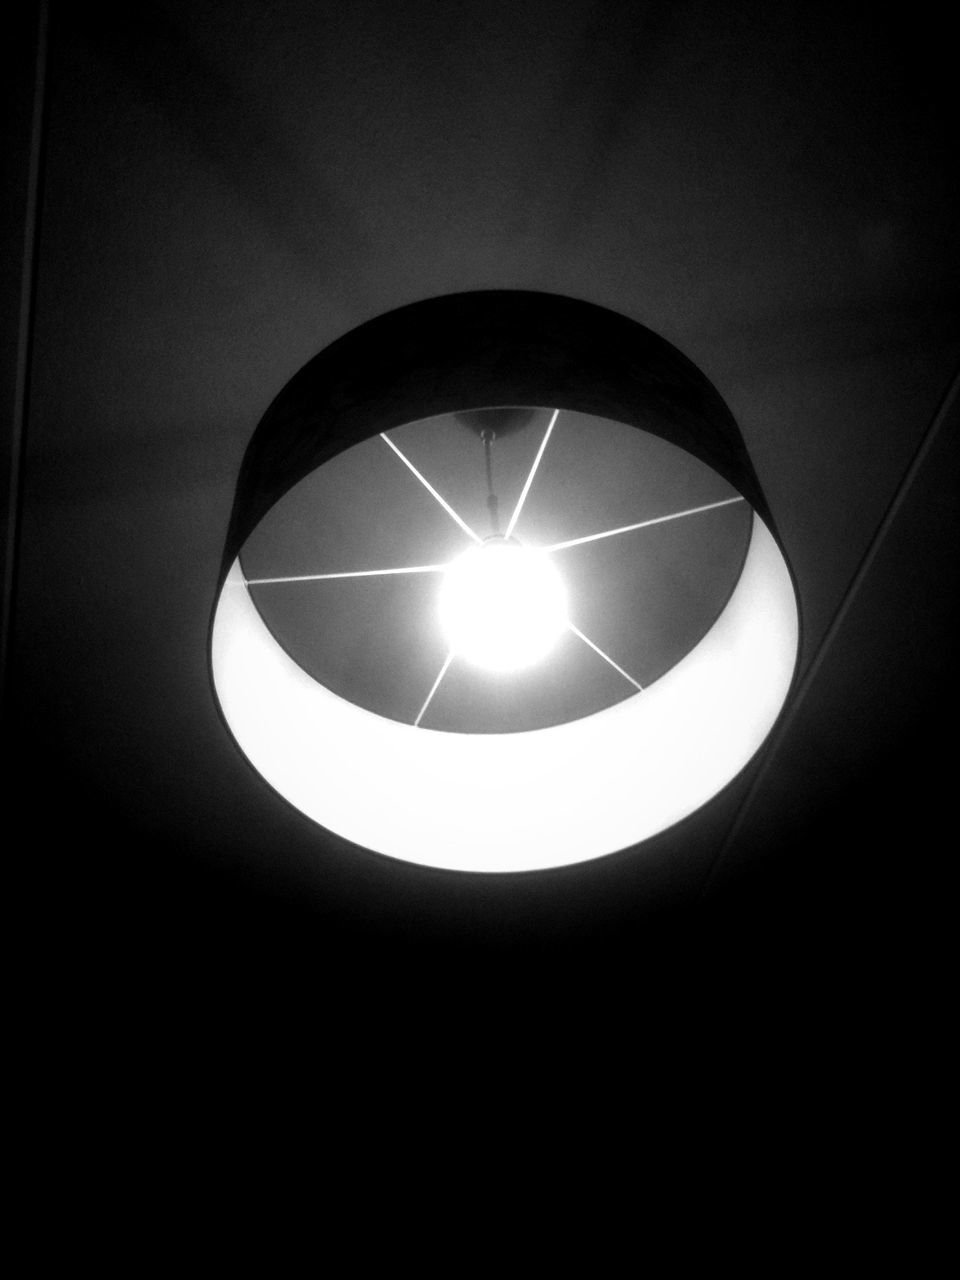 low angle view, lighting equipment, illuminated, indoors, circle, electricity, electric light, built structure, geometric shape, ceiling, electric lamp, directly below, light bulb, dark, glowing, architecture, no people, night, light - natural phenomenon, reflection